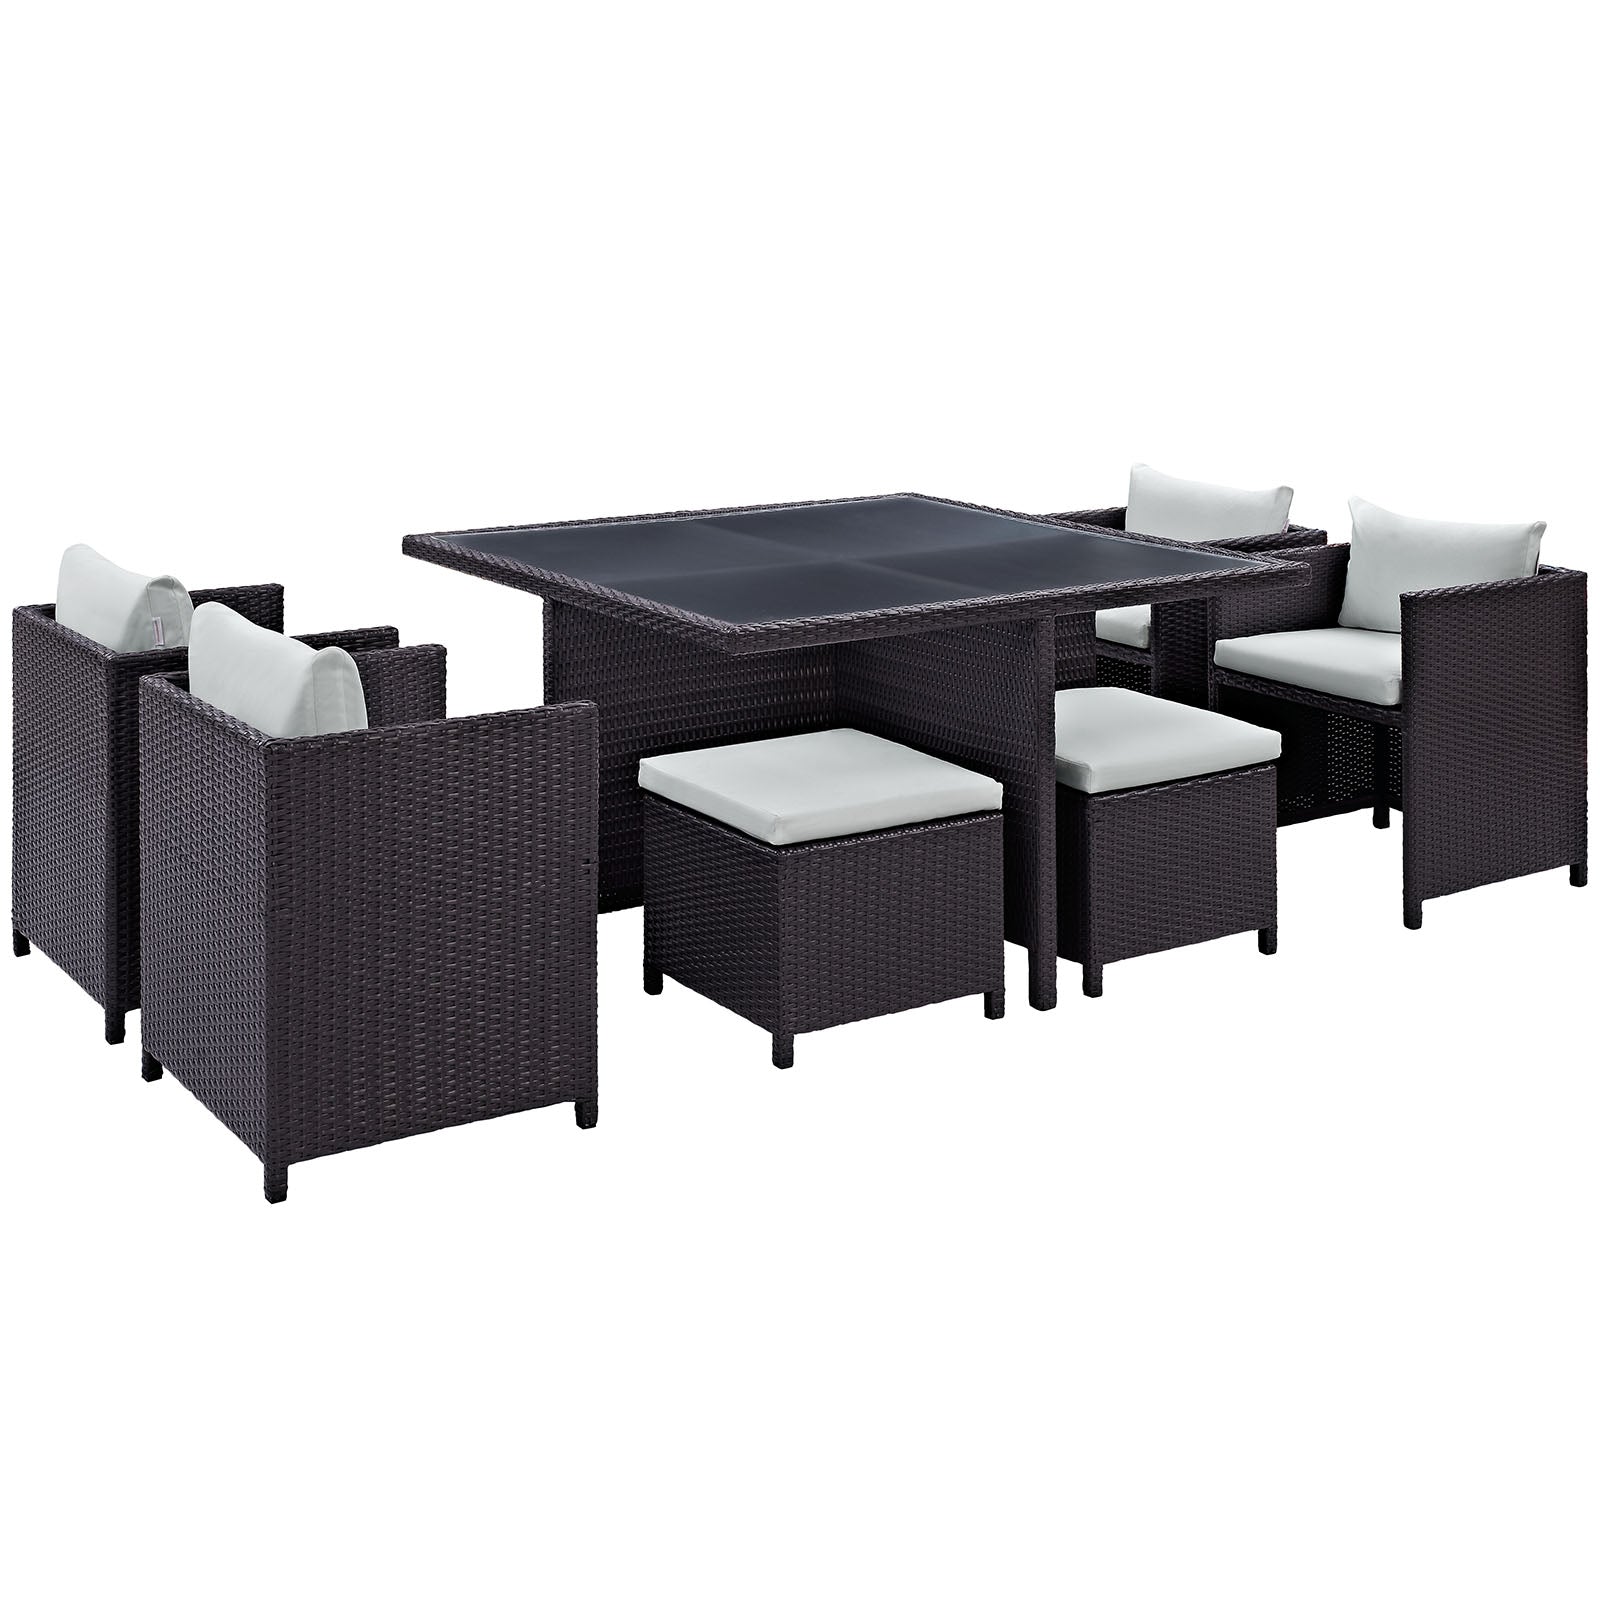 Inverse 9 Piece Outdoor Patio Dining Set - East Shore Modern Home Furnishings